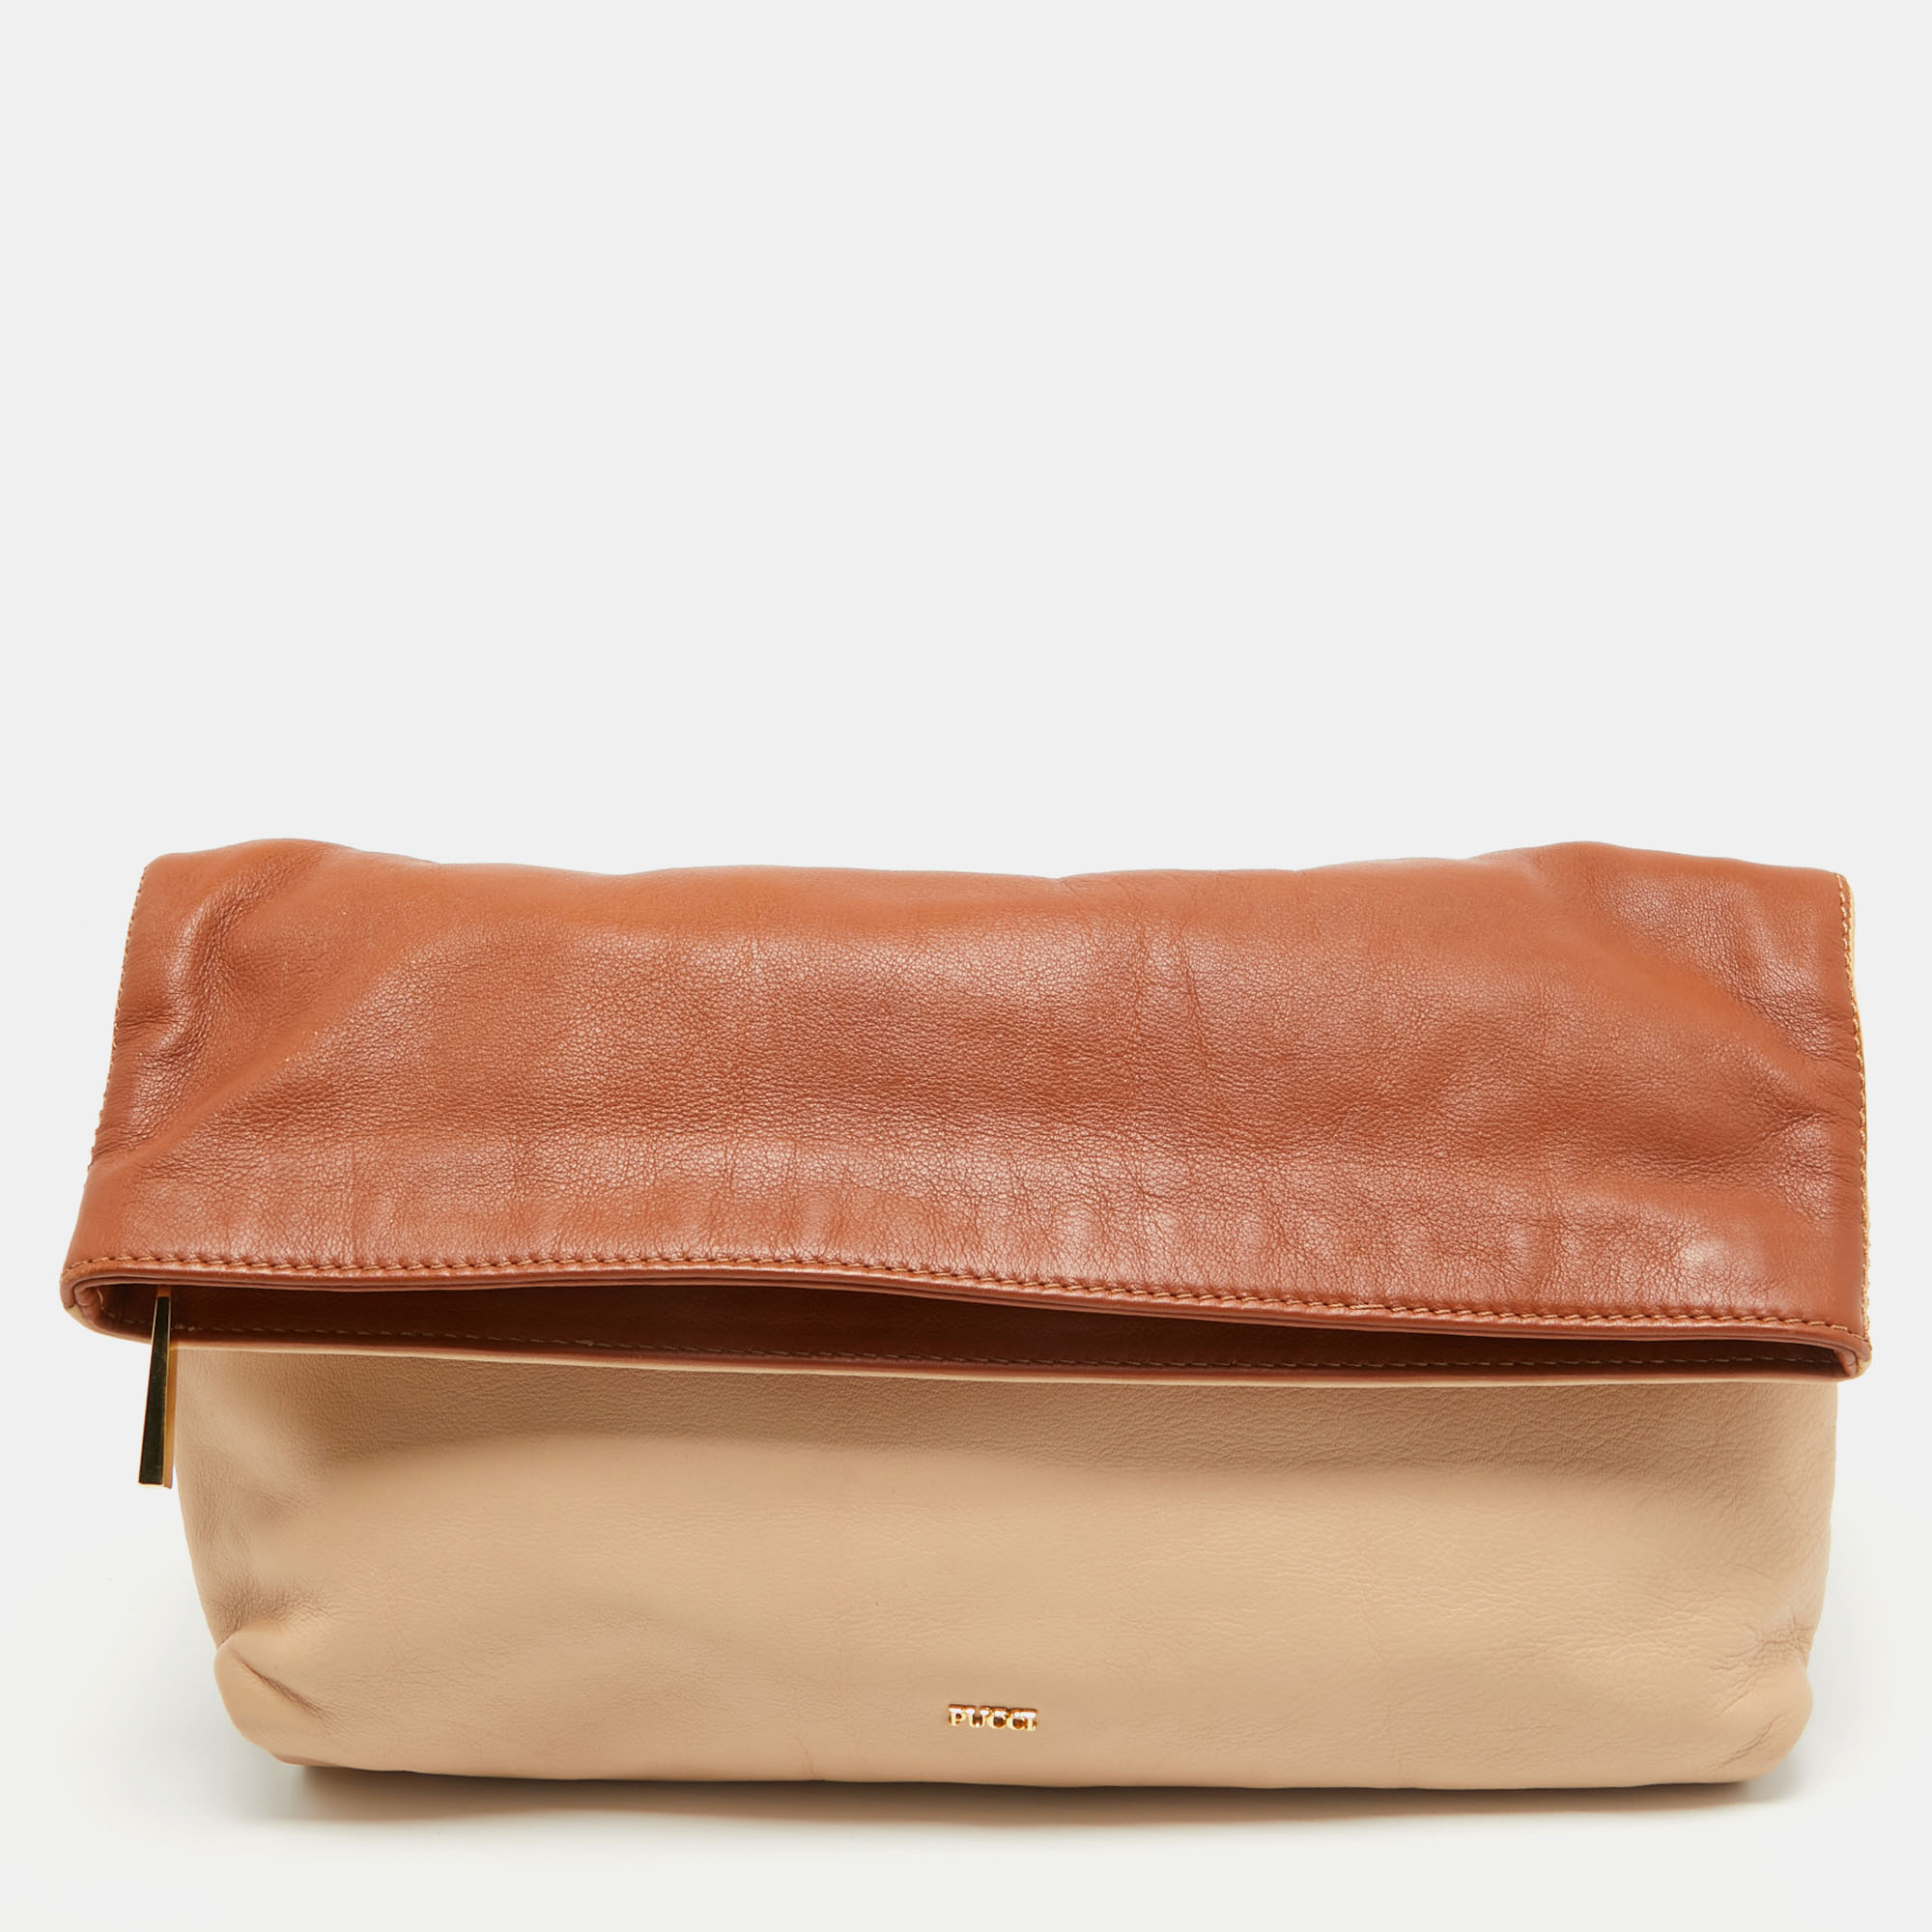 Pre-owned Emilio Pucci Brown/beige Leather Fold Over Clutch